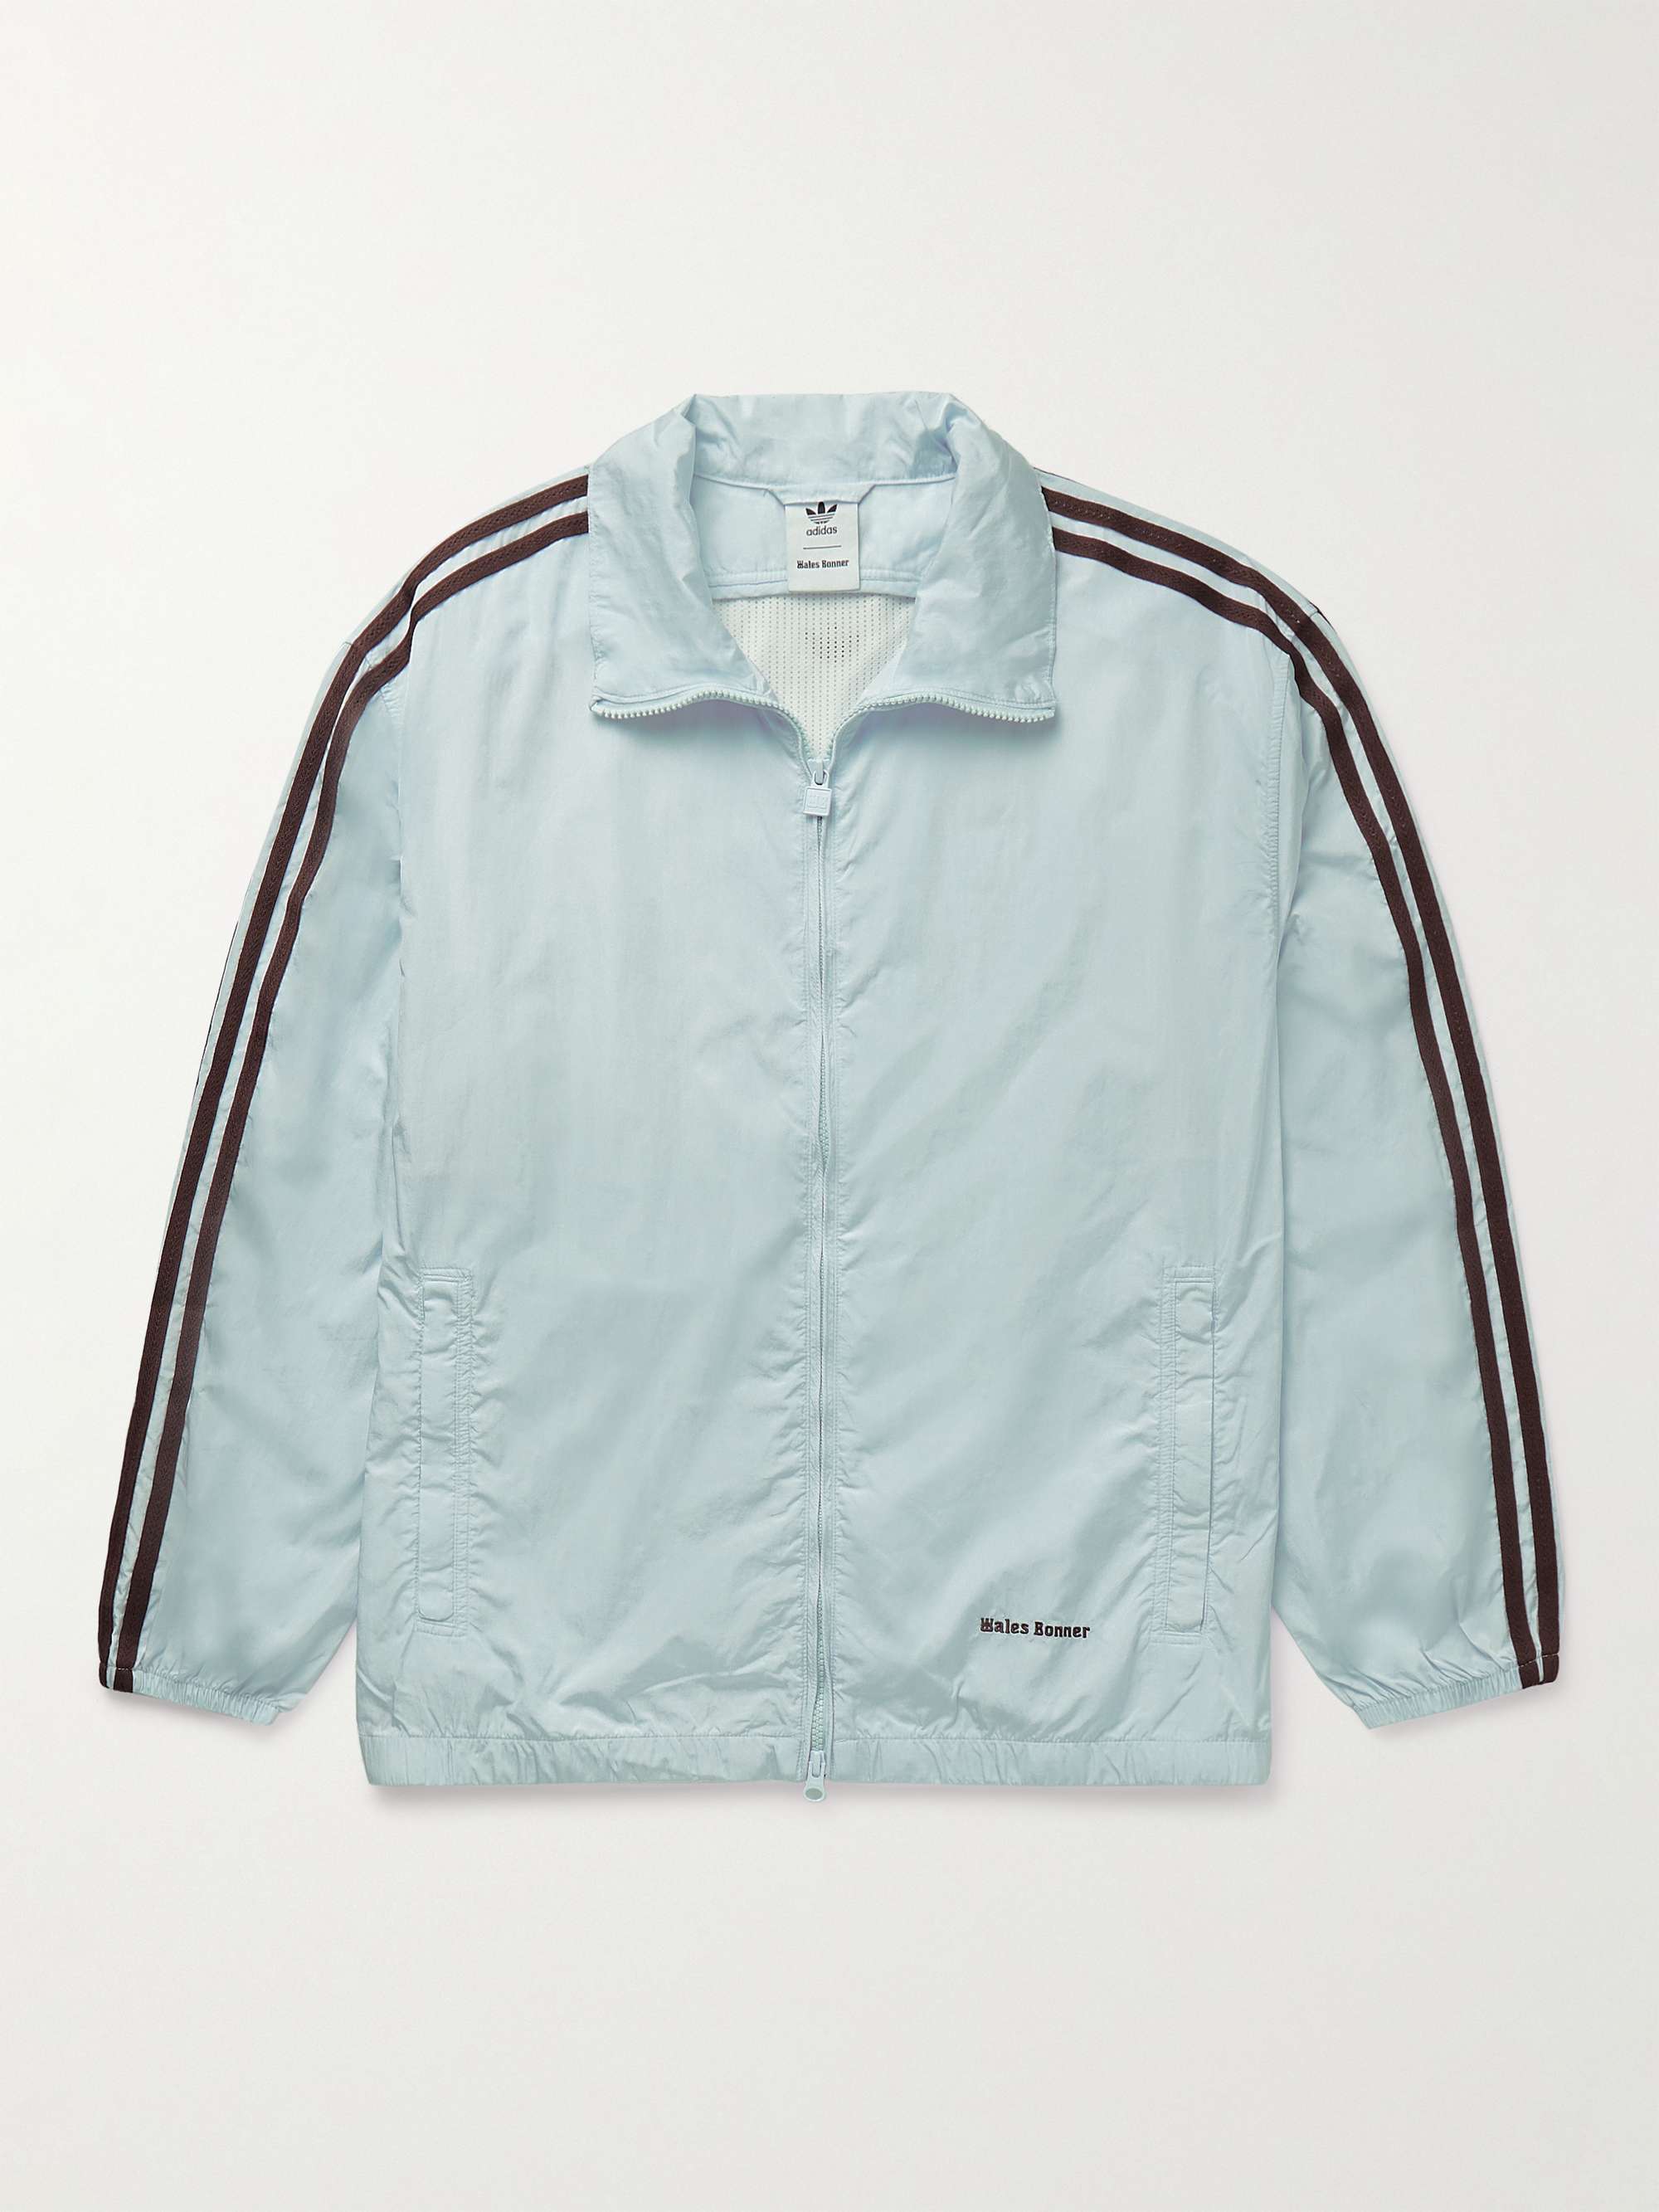 ADIDAS CONSORTIUM + Wales Bonner Striped Crochet-Trimmed Recycled-Shell  Track Jacket for Men | MR PORTER